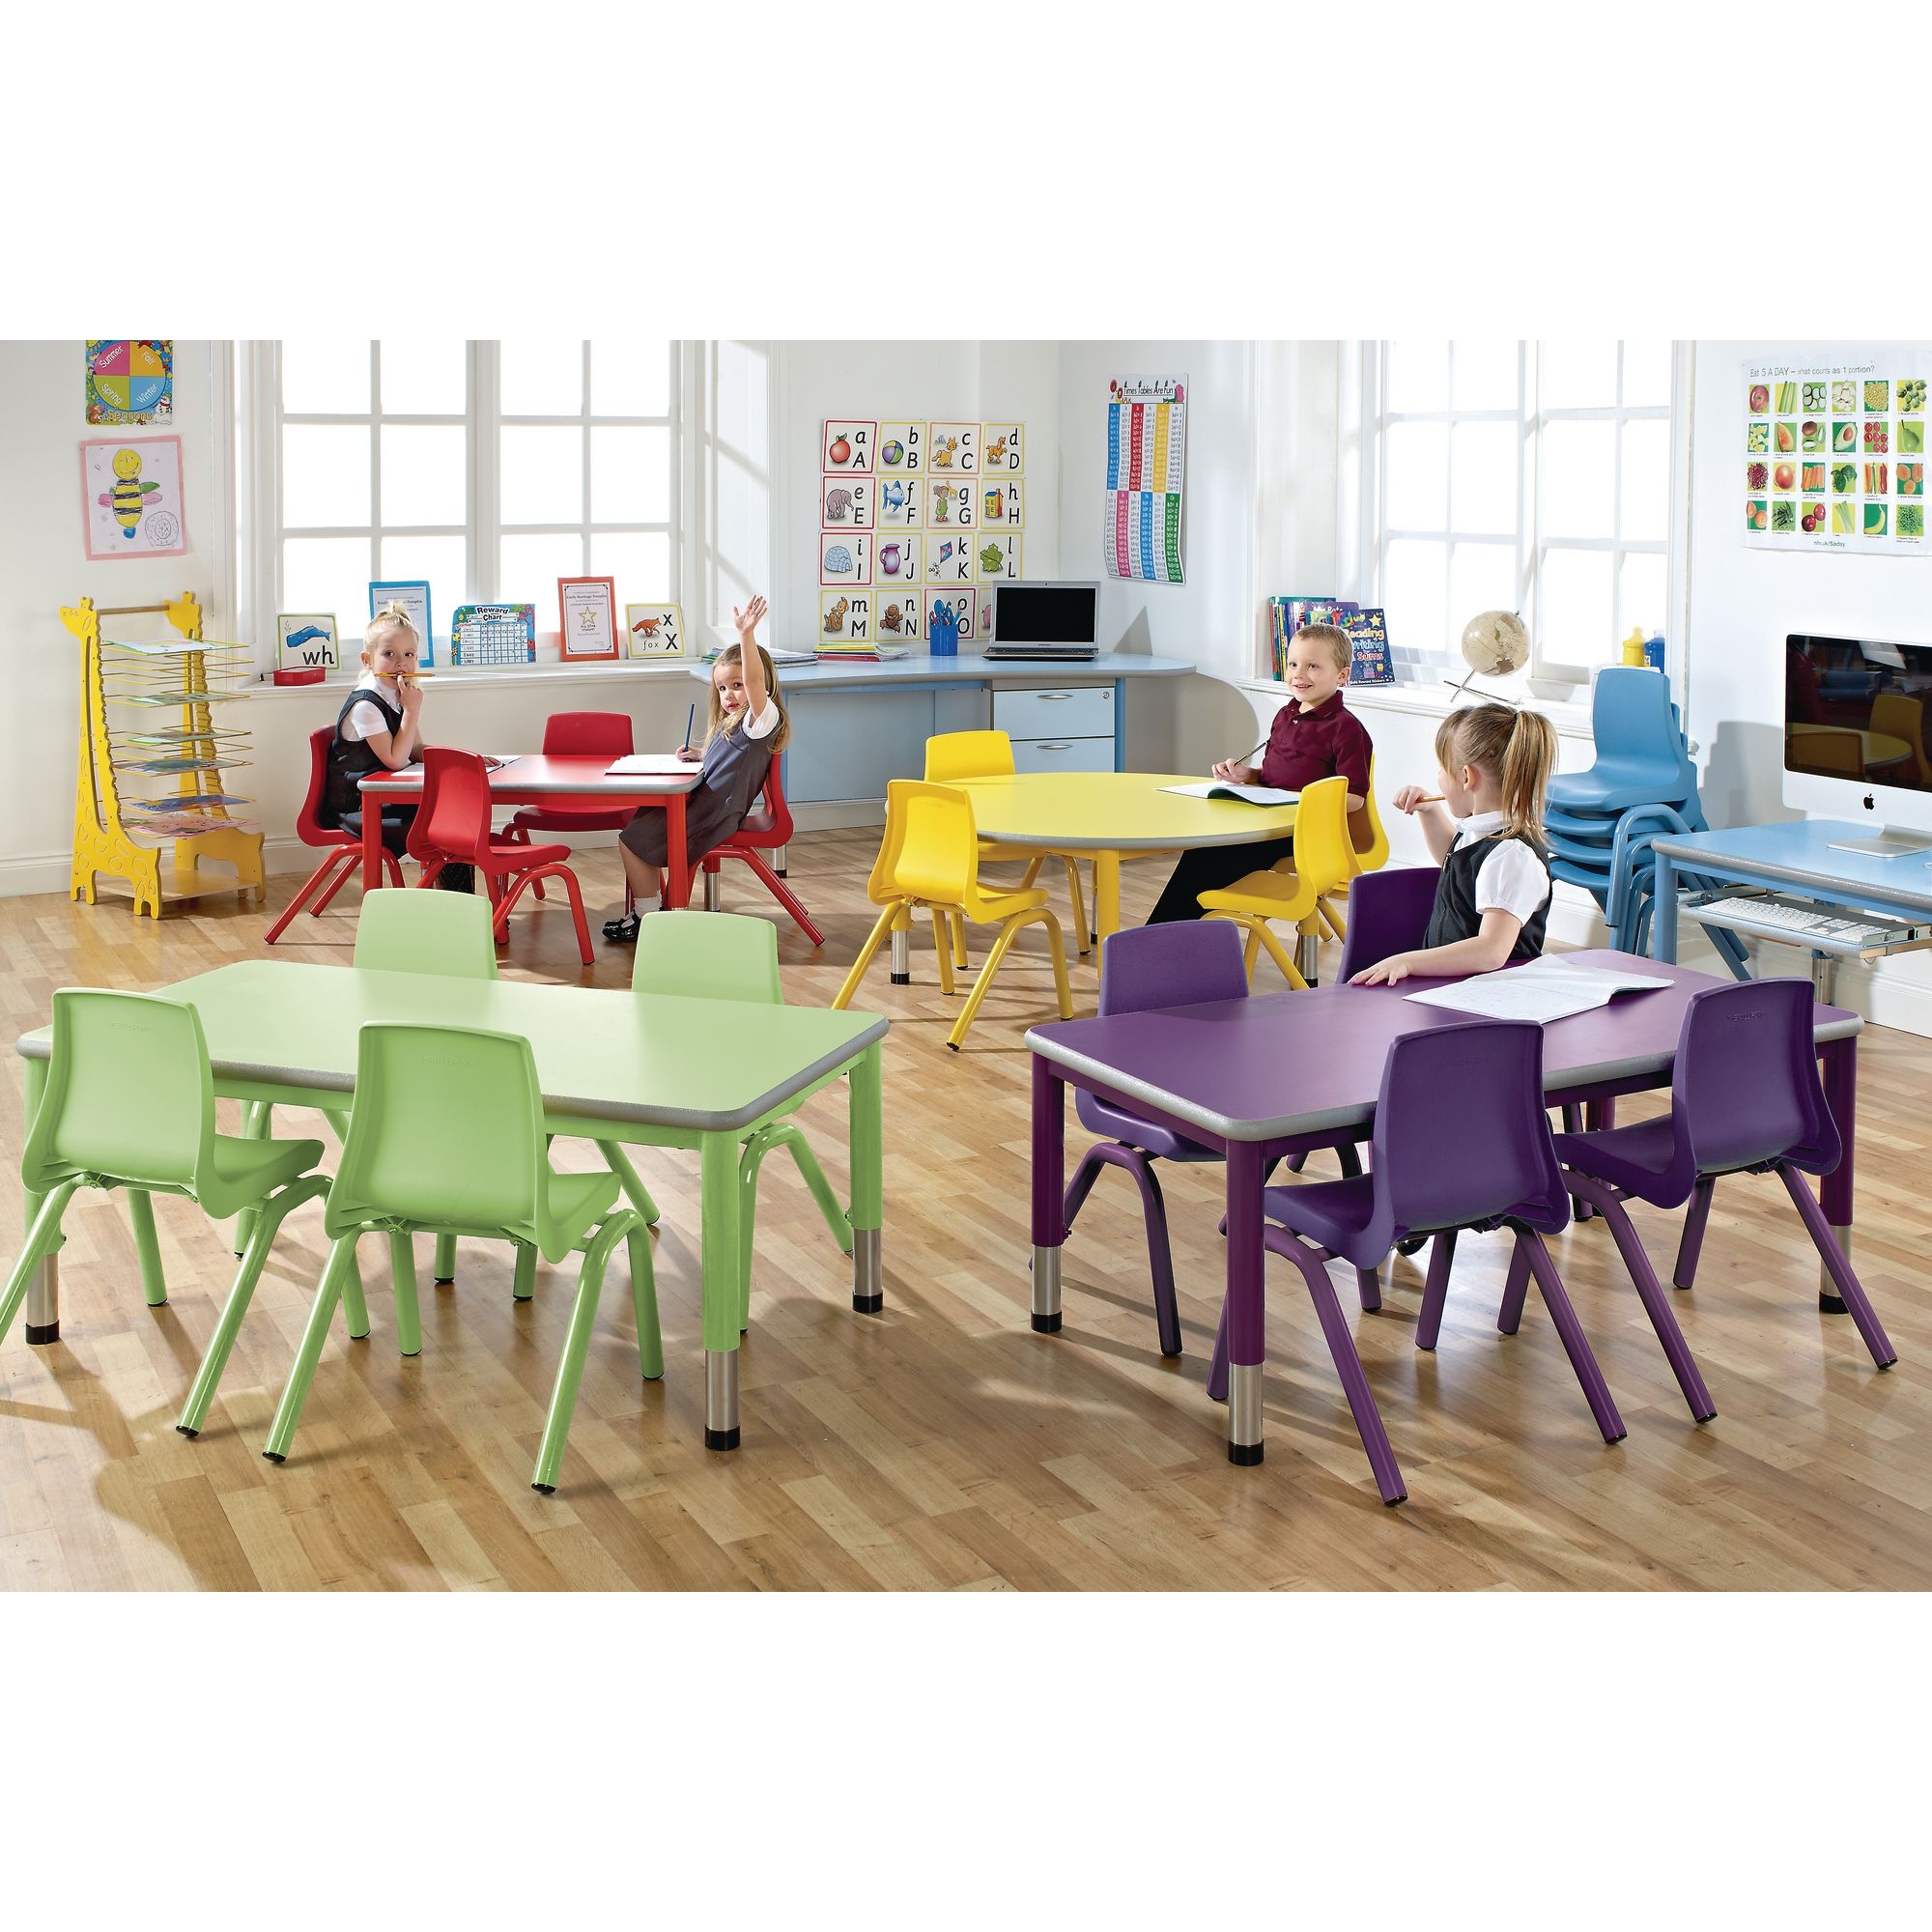 Harlequin Rectangular Height Adjustable Steel Classroom Pack: Table and 4 Chairs - 900 x 600 x 640mm - Tangy Lime